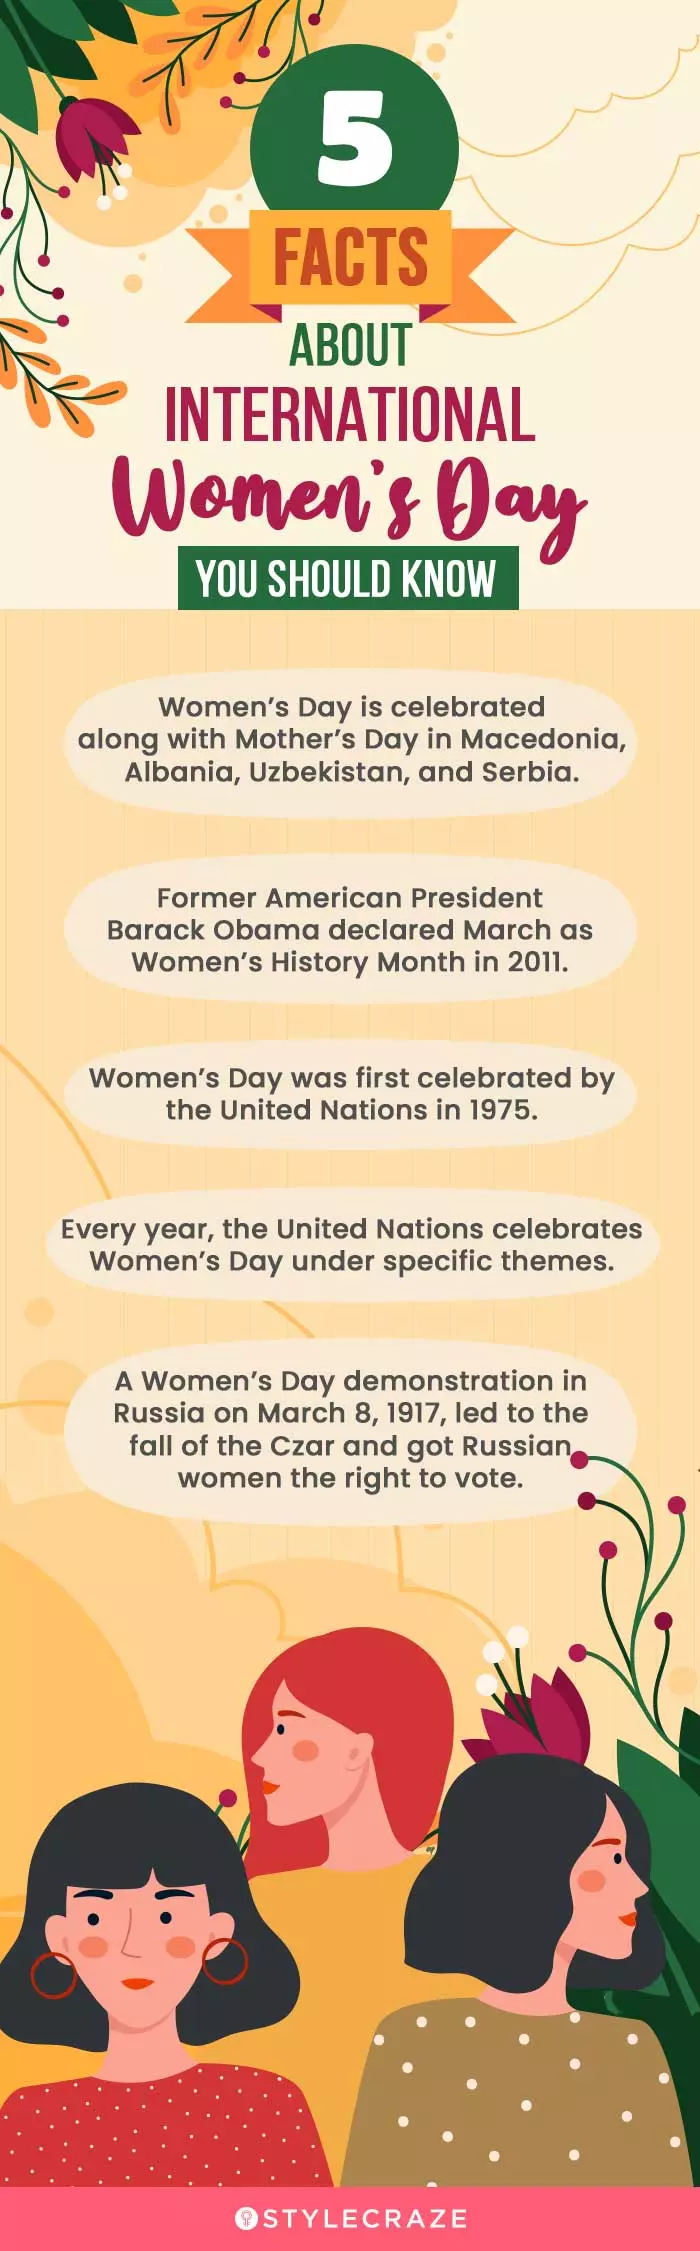 7 facts about international womens day you should know (infographic)